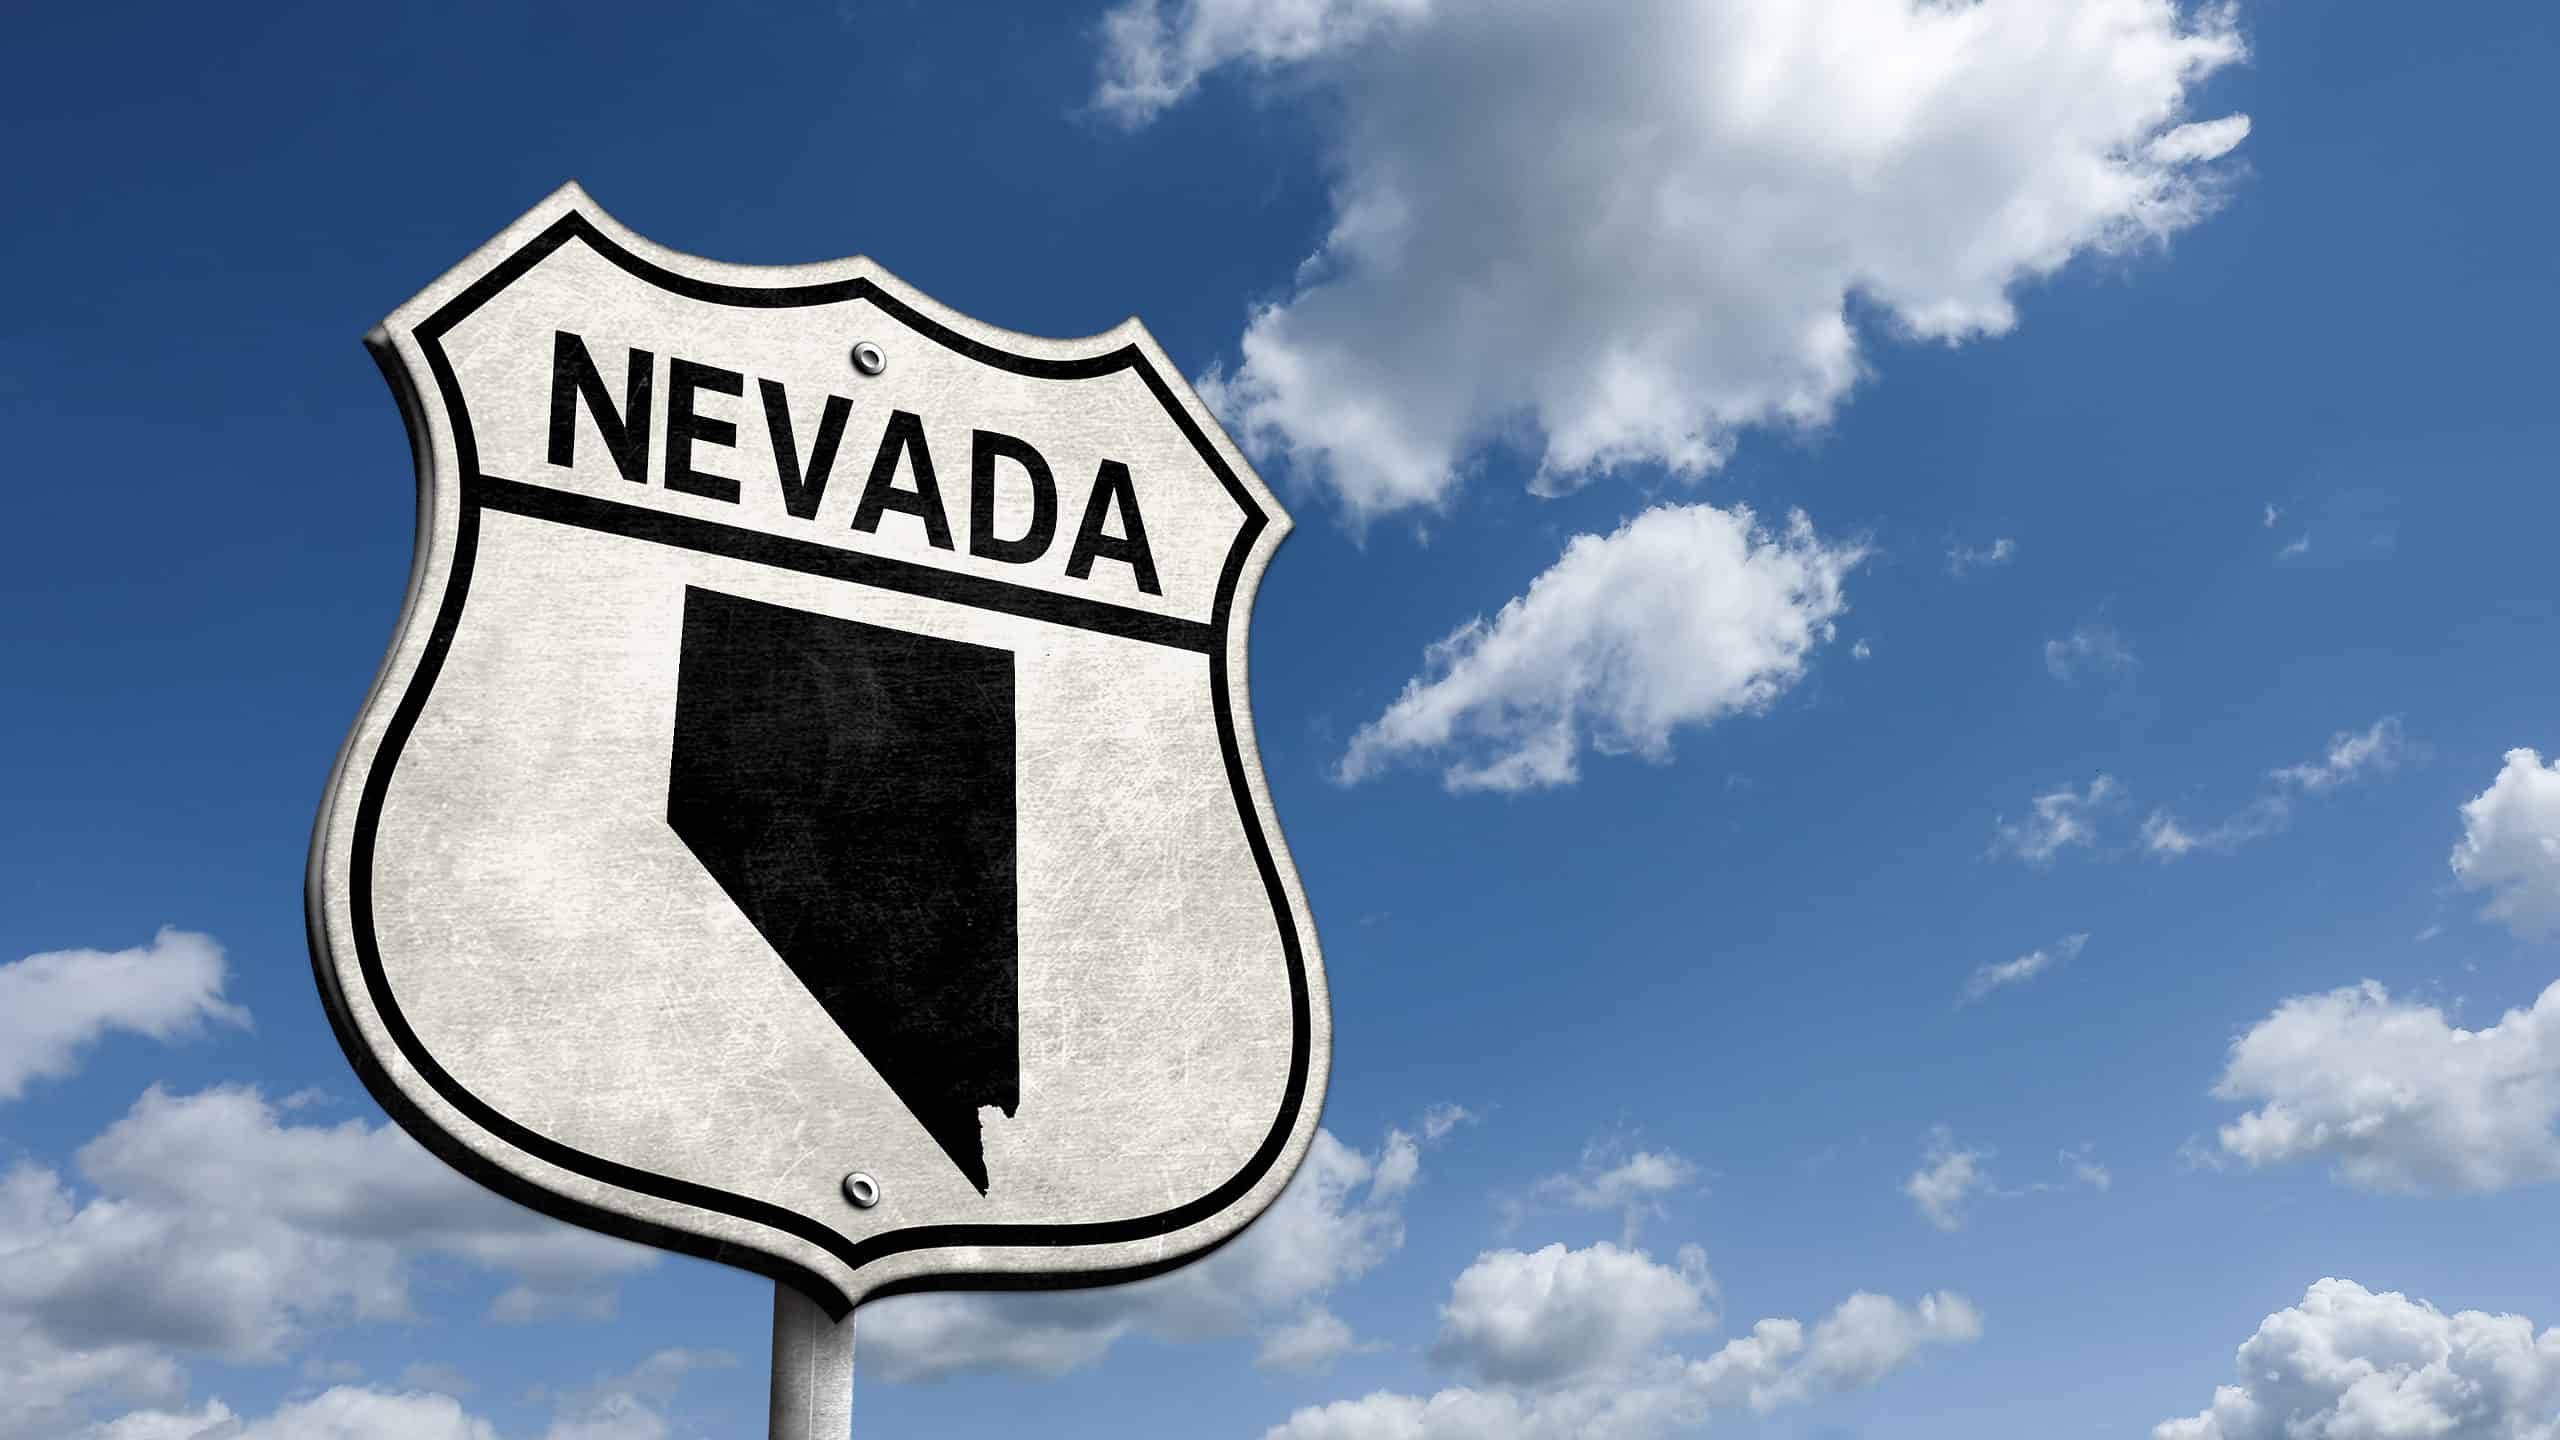 Route 66 Nevada state map roadsign